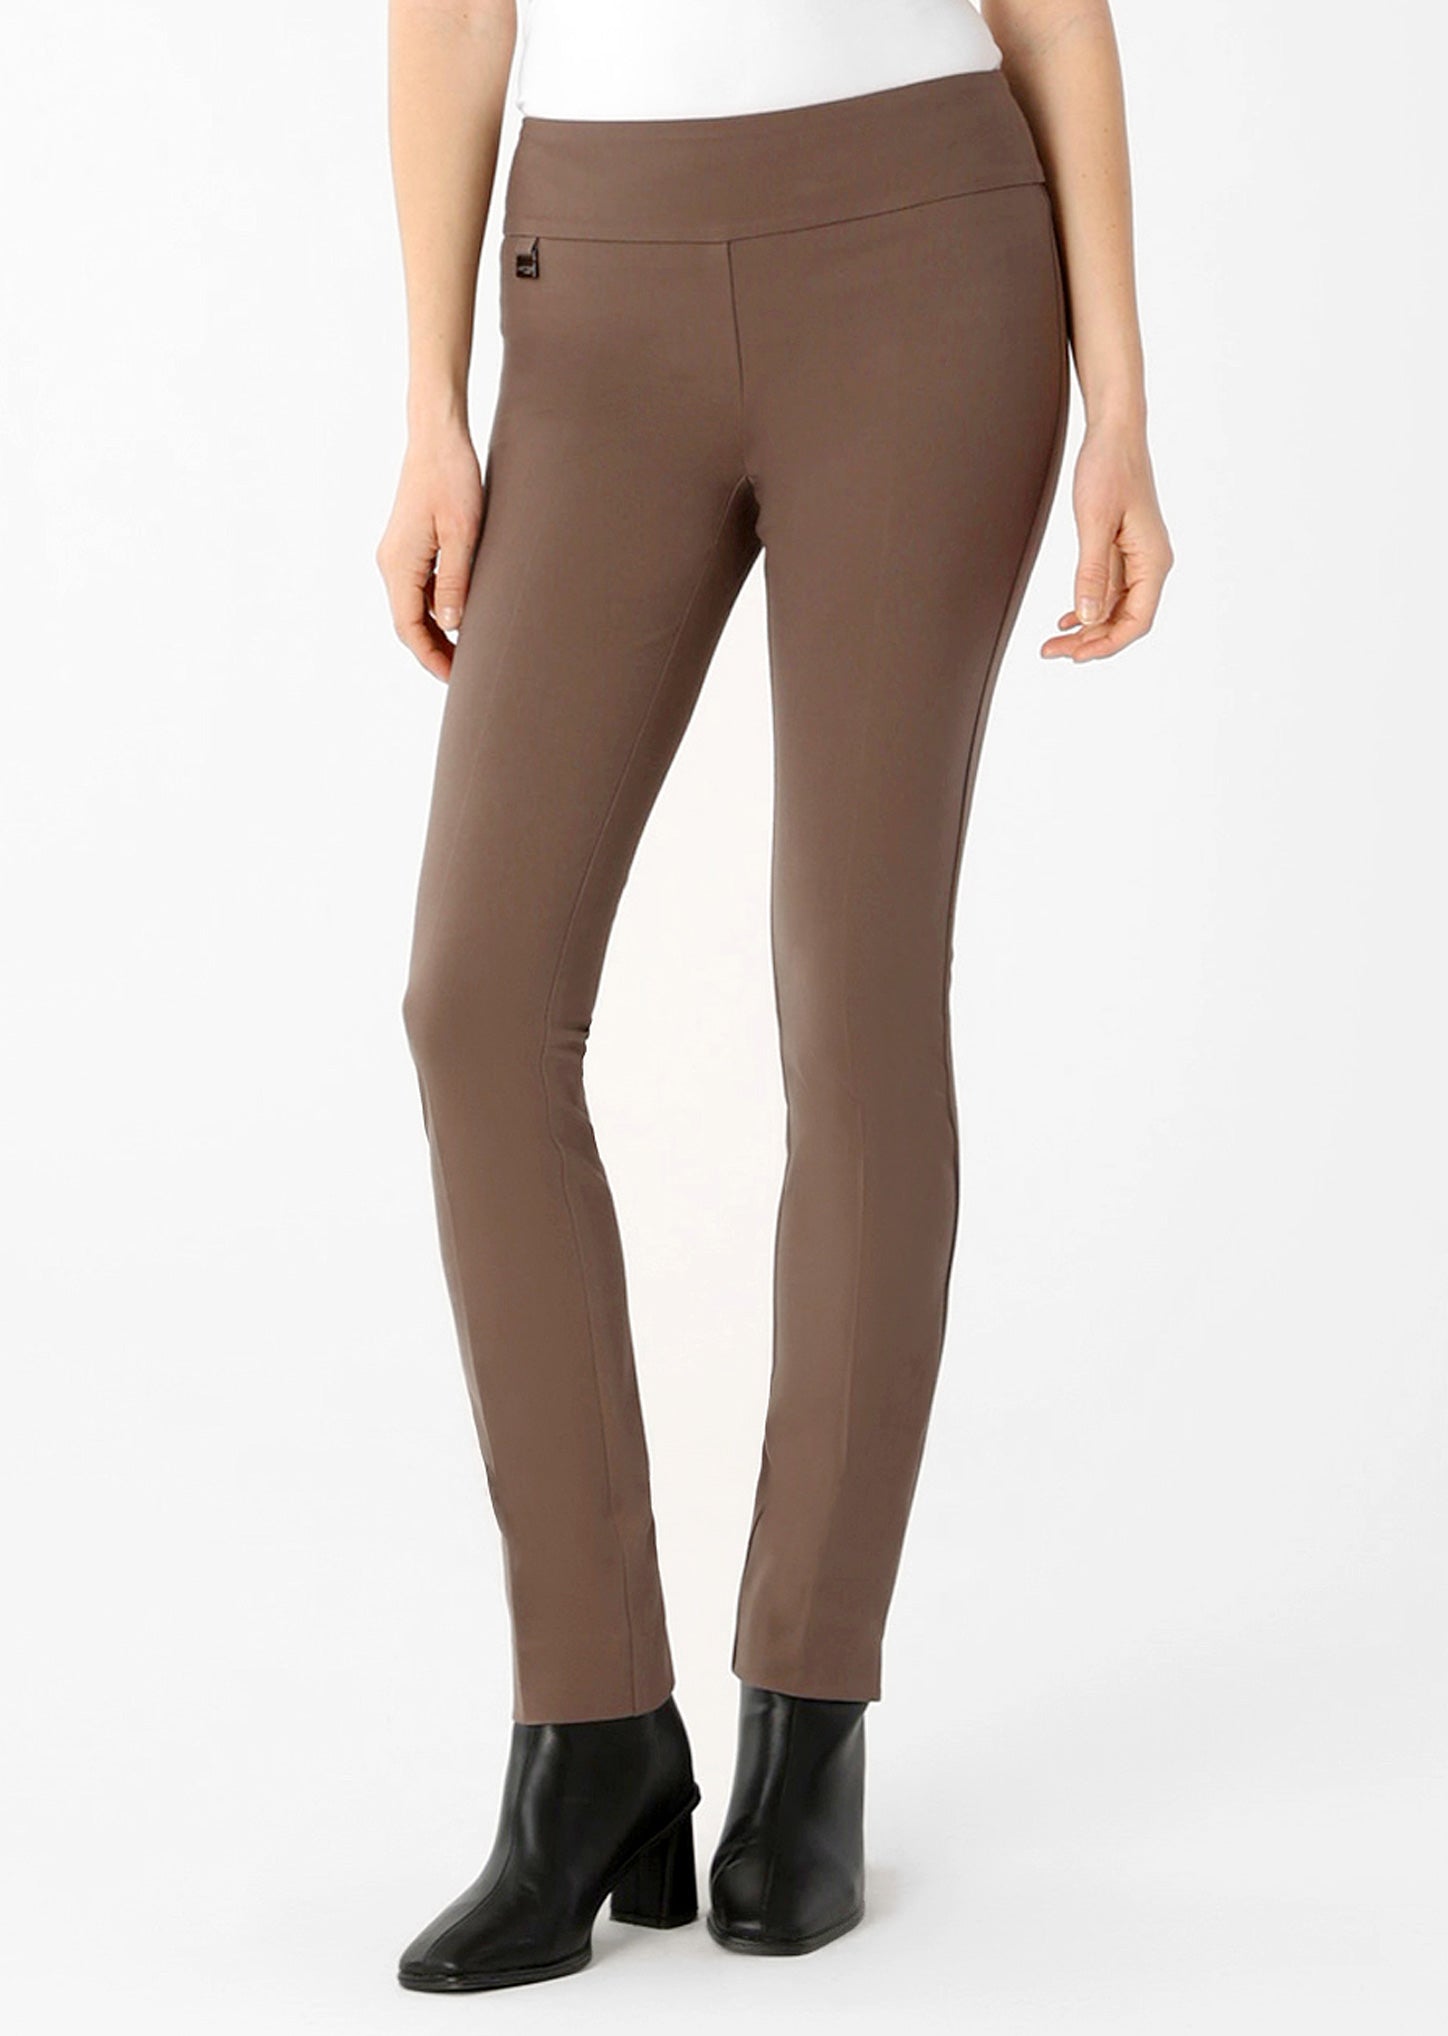 Hollywood Fabric, 31 Slim Pant– Lisette L Montreal - Canada